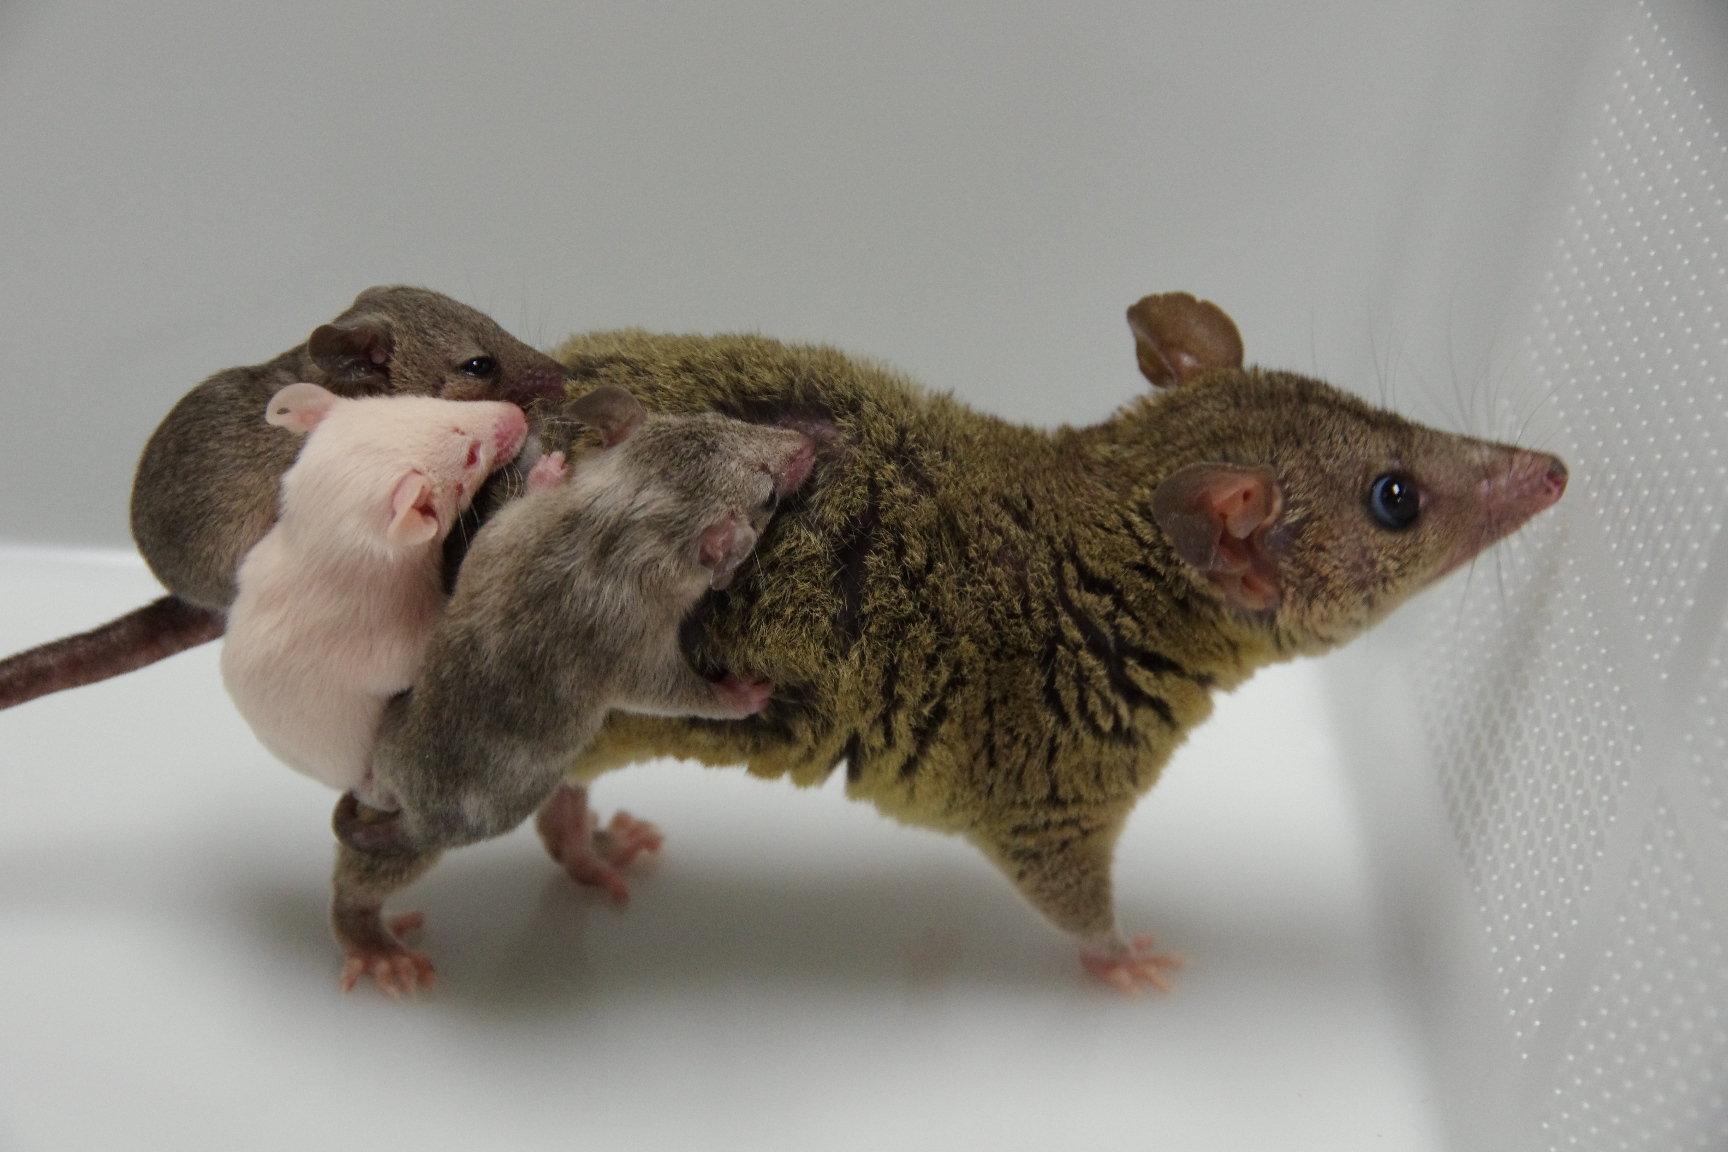 First genome editing in marsupials